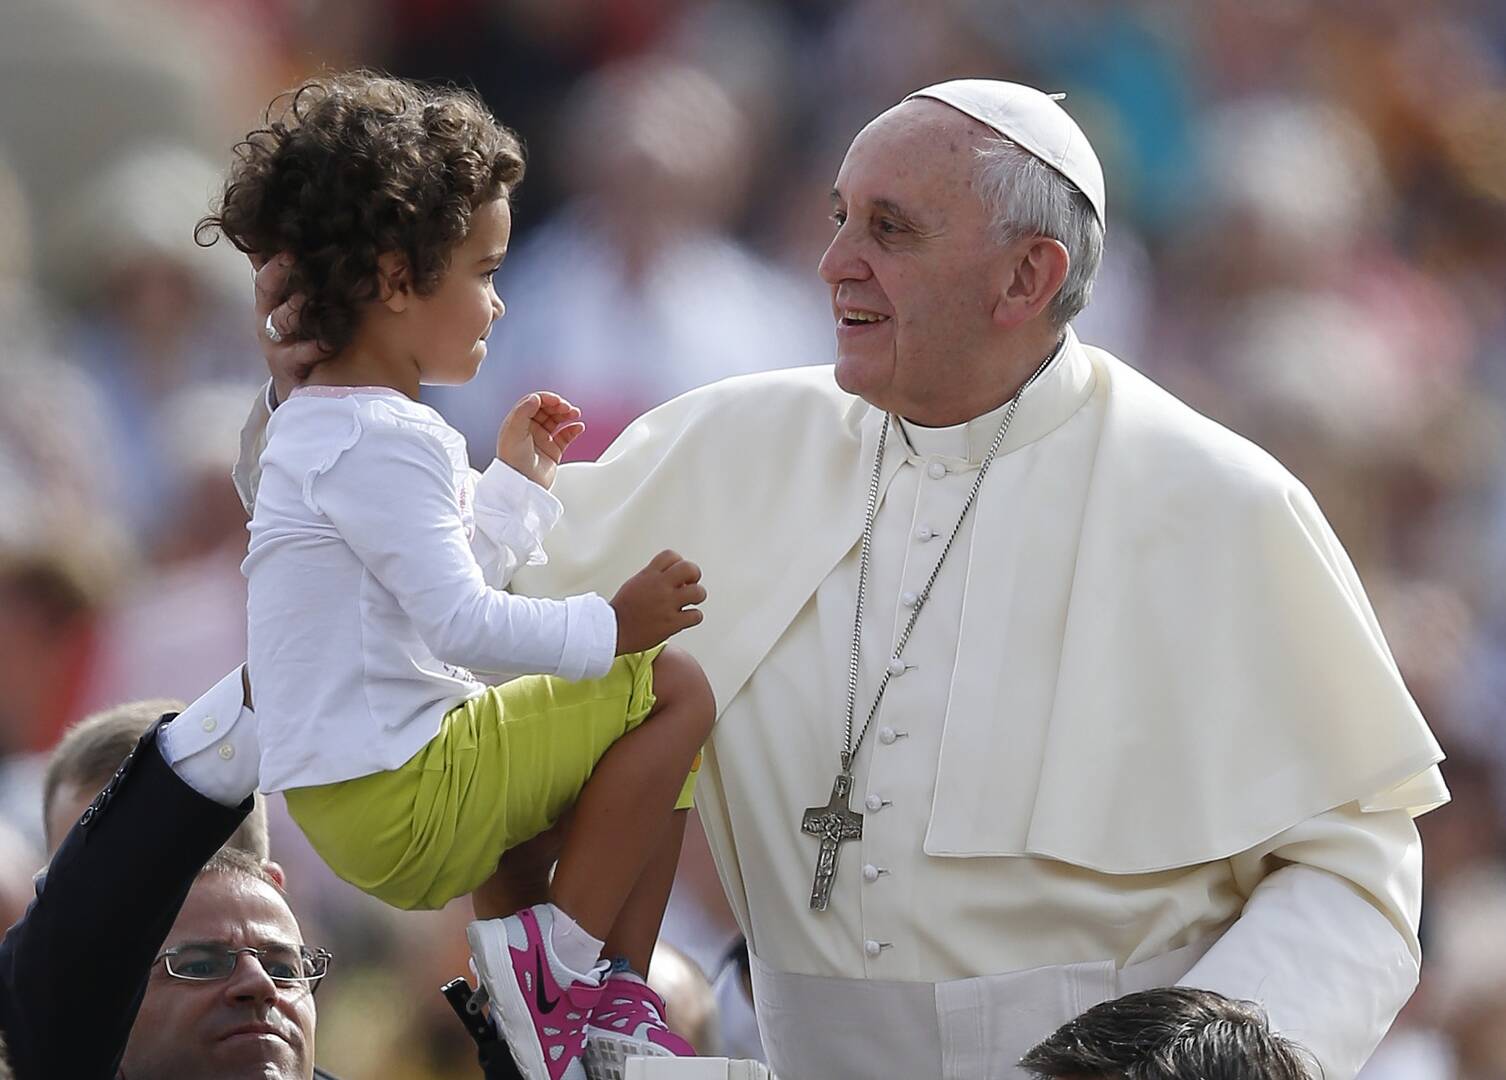 pope francis greets a toddler at a general audience in 2013, the child is wearing a long sleeve shirt and has curly hair